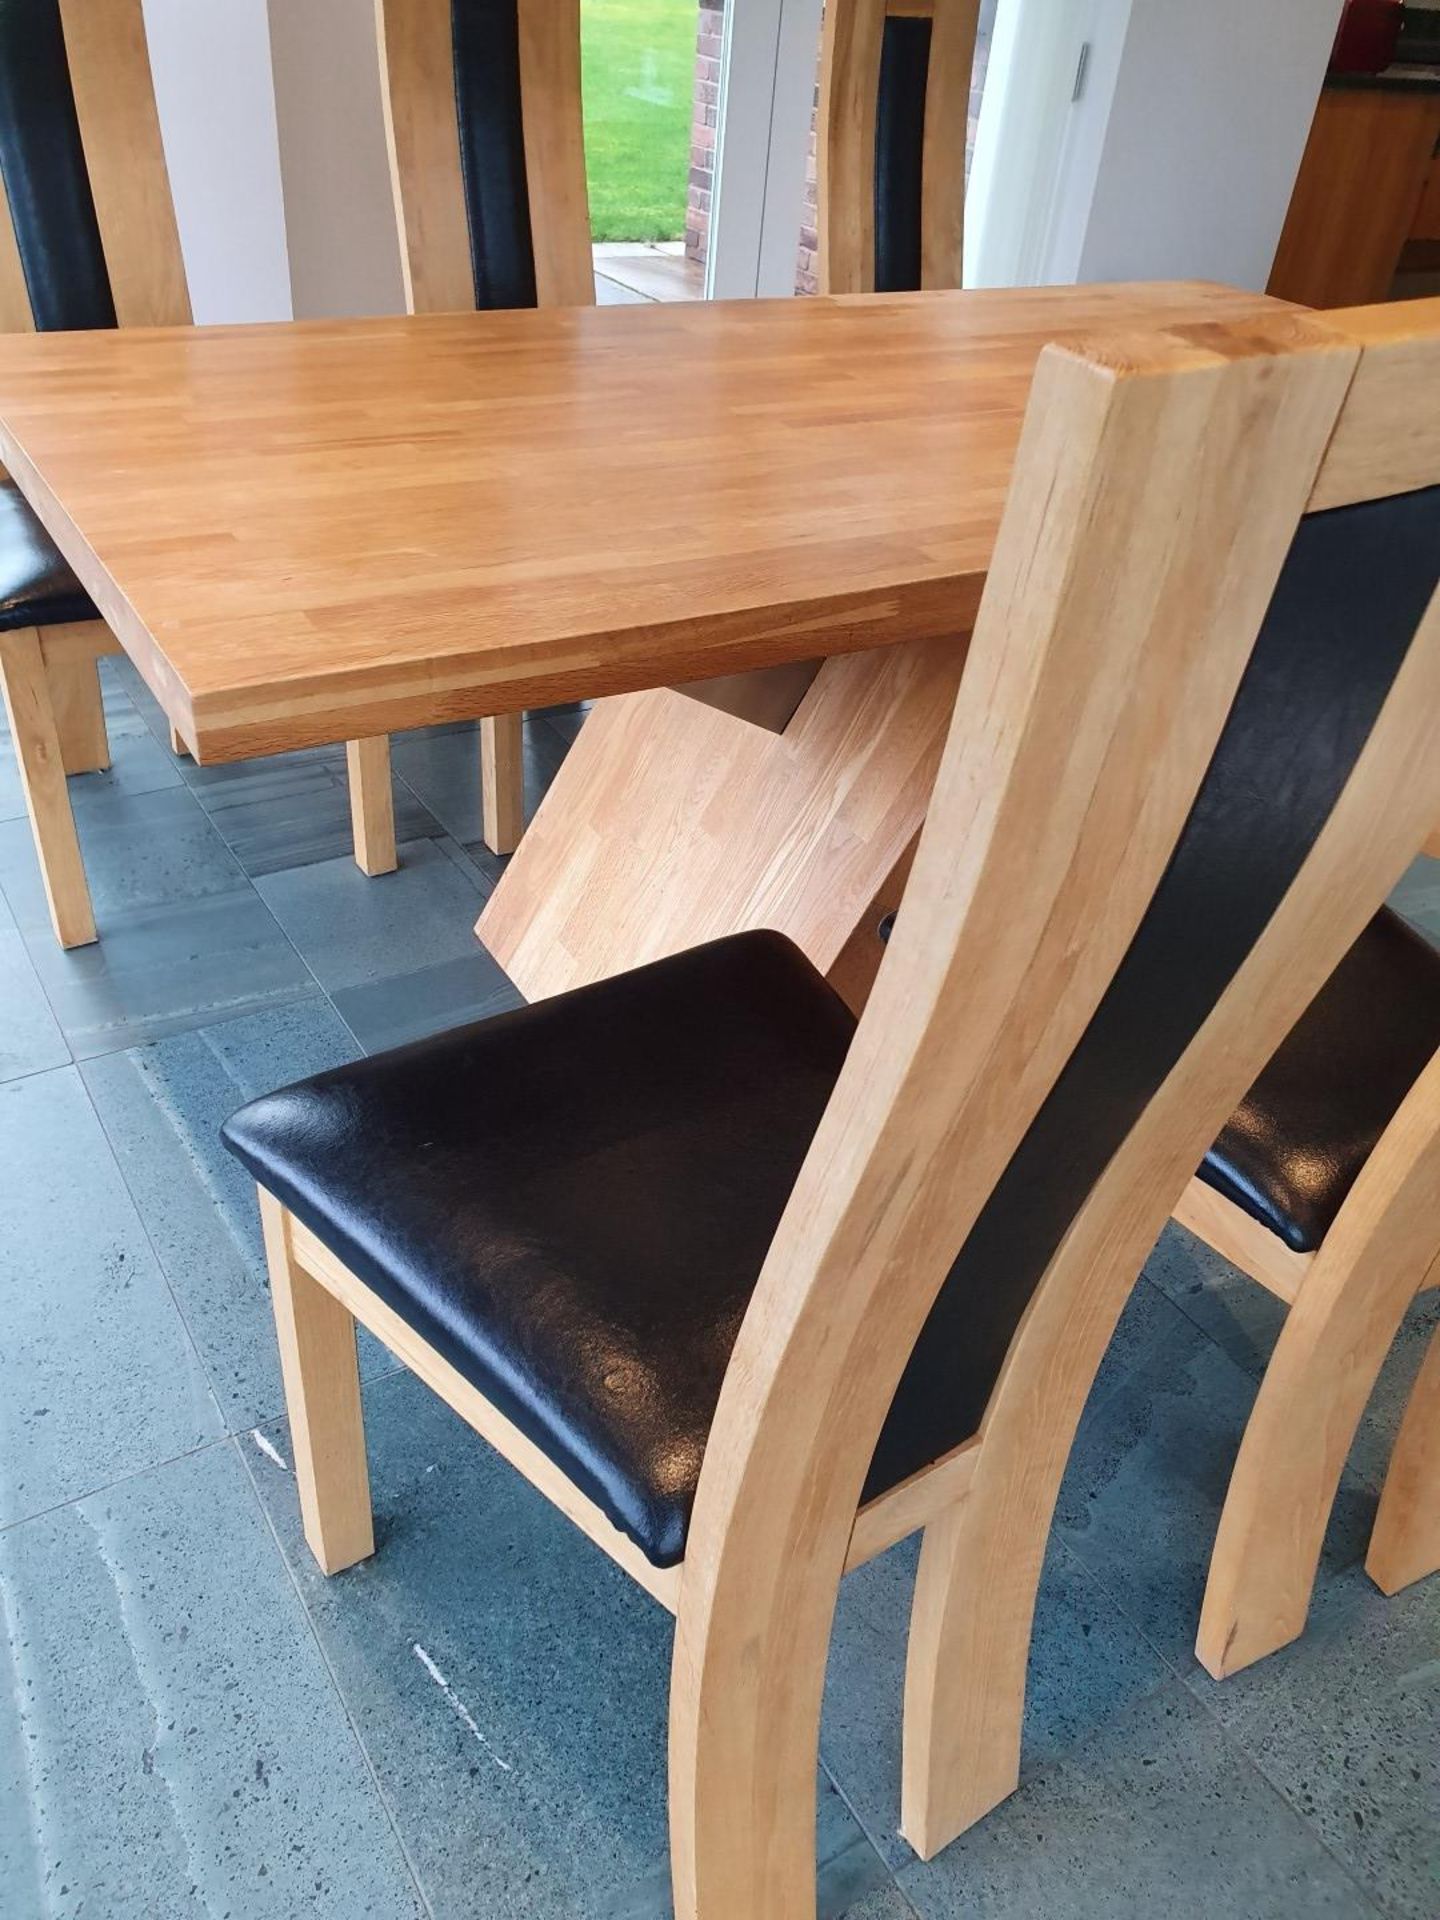 1 x Solid Oak 1.8 Metre Dining Table With 6 x High Back Dining Chairs - Pre-owned In Great Condition - Image 2 of 12